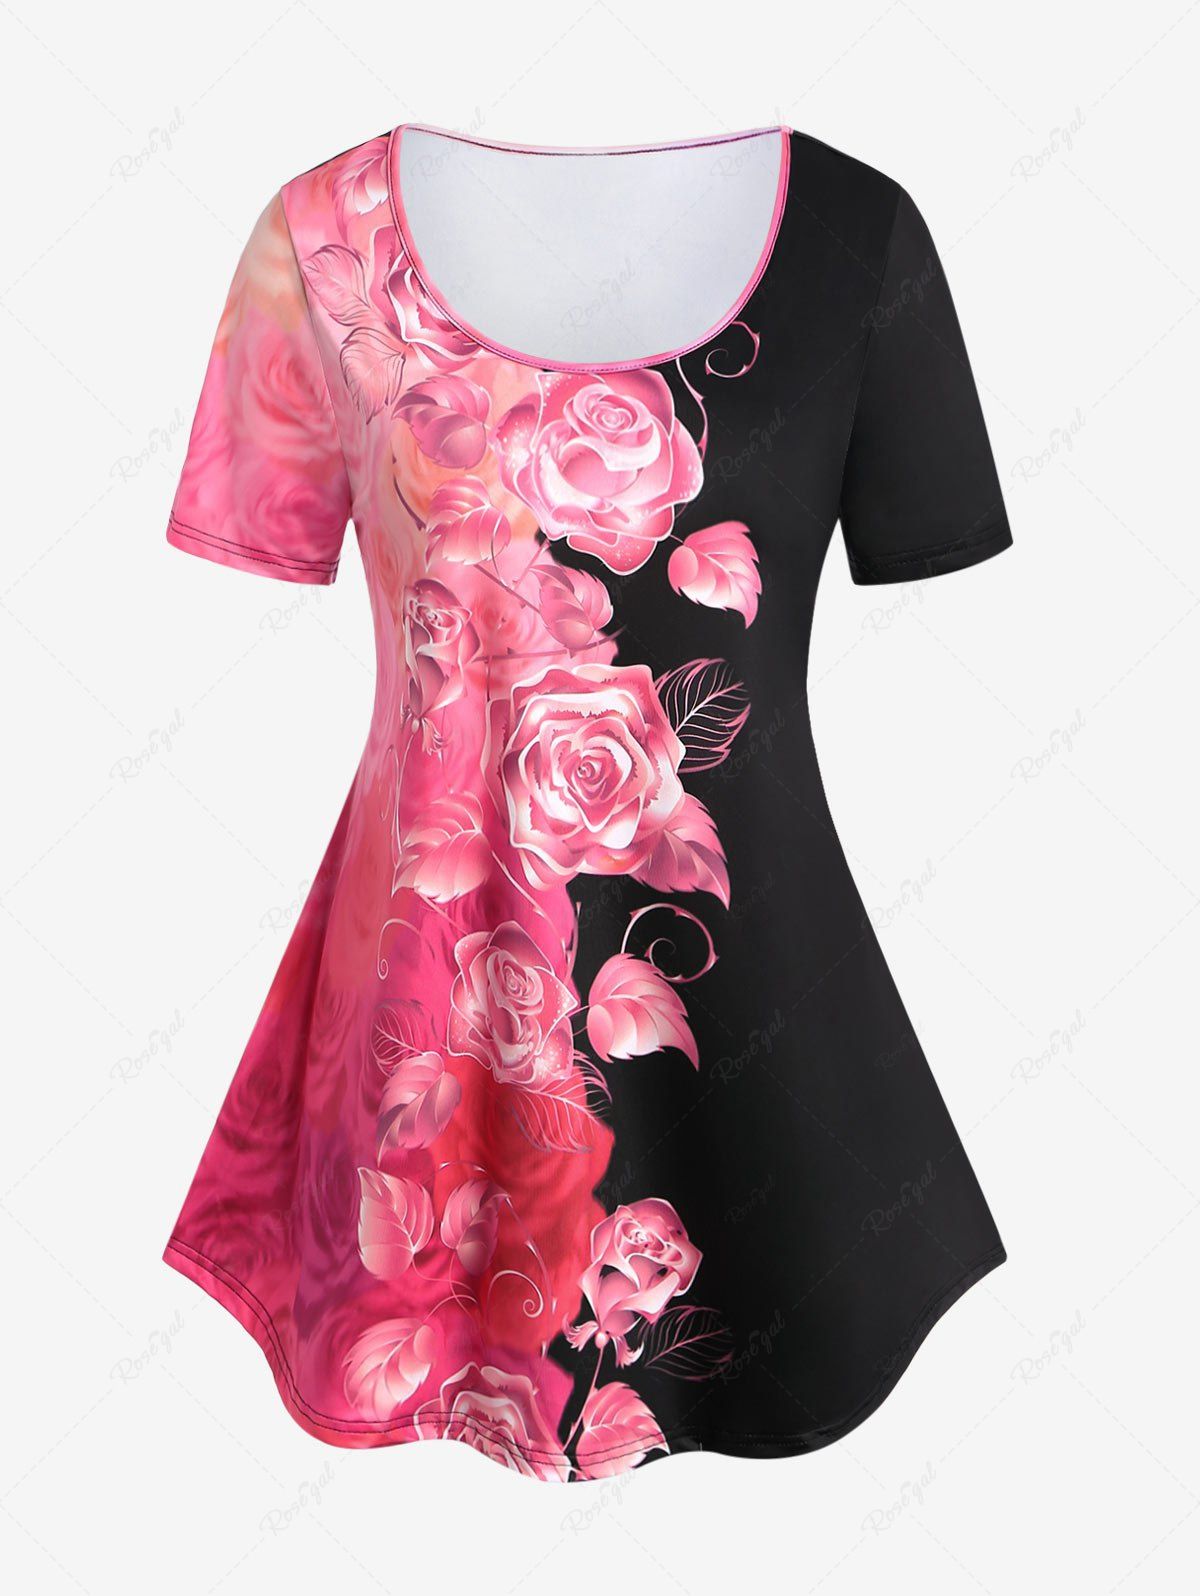 Affordable Plus Size Rose Print Colorblock Tee  